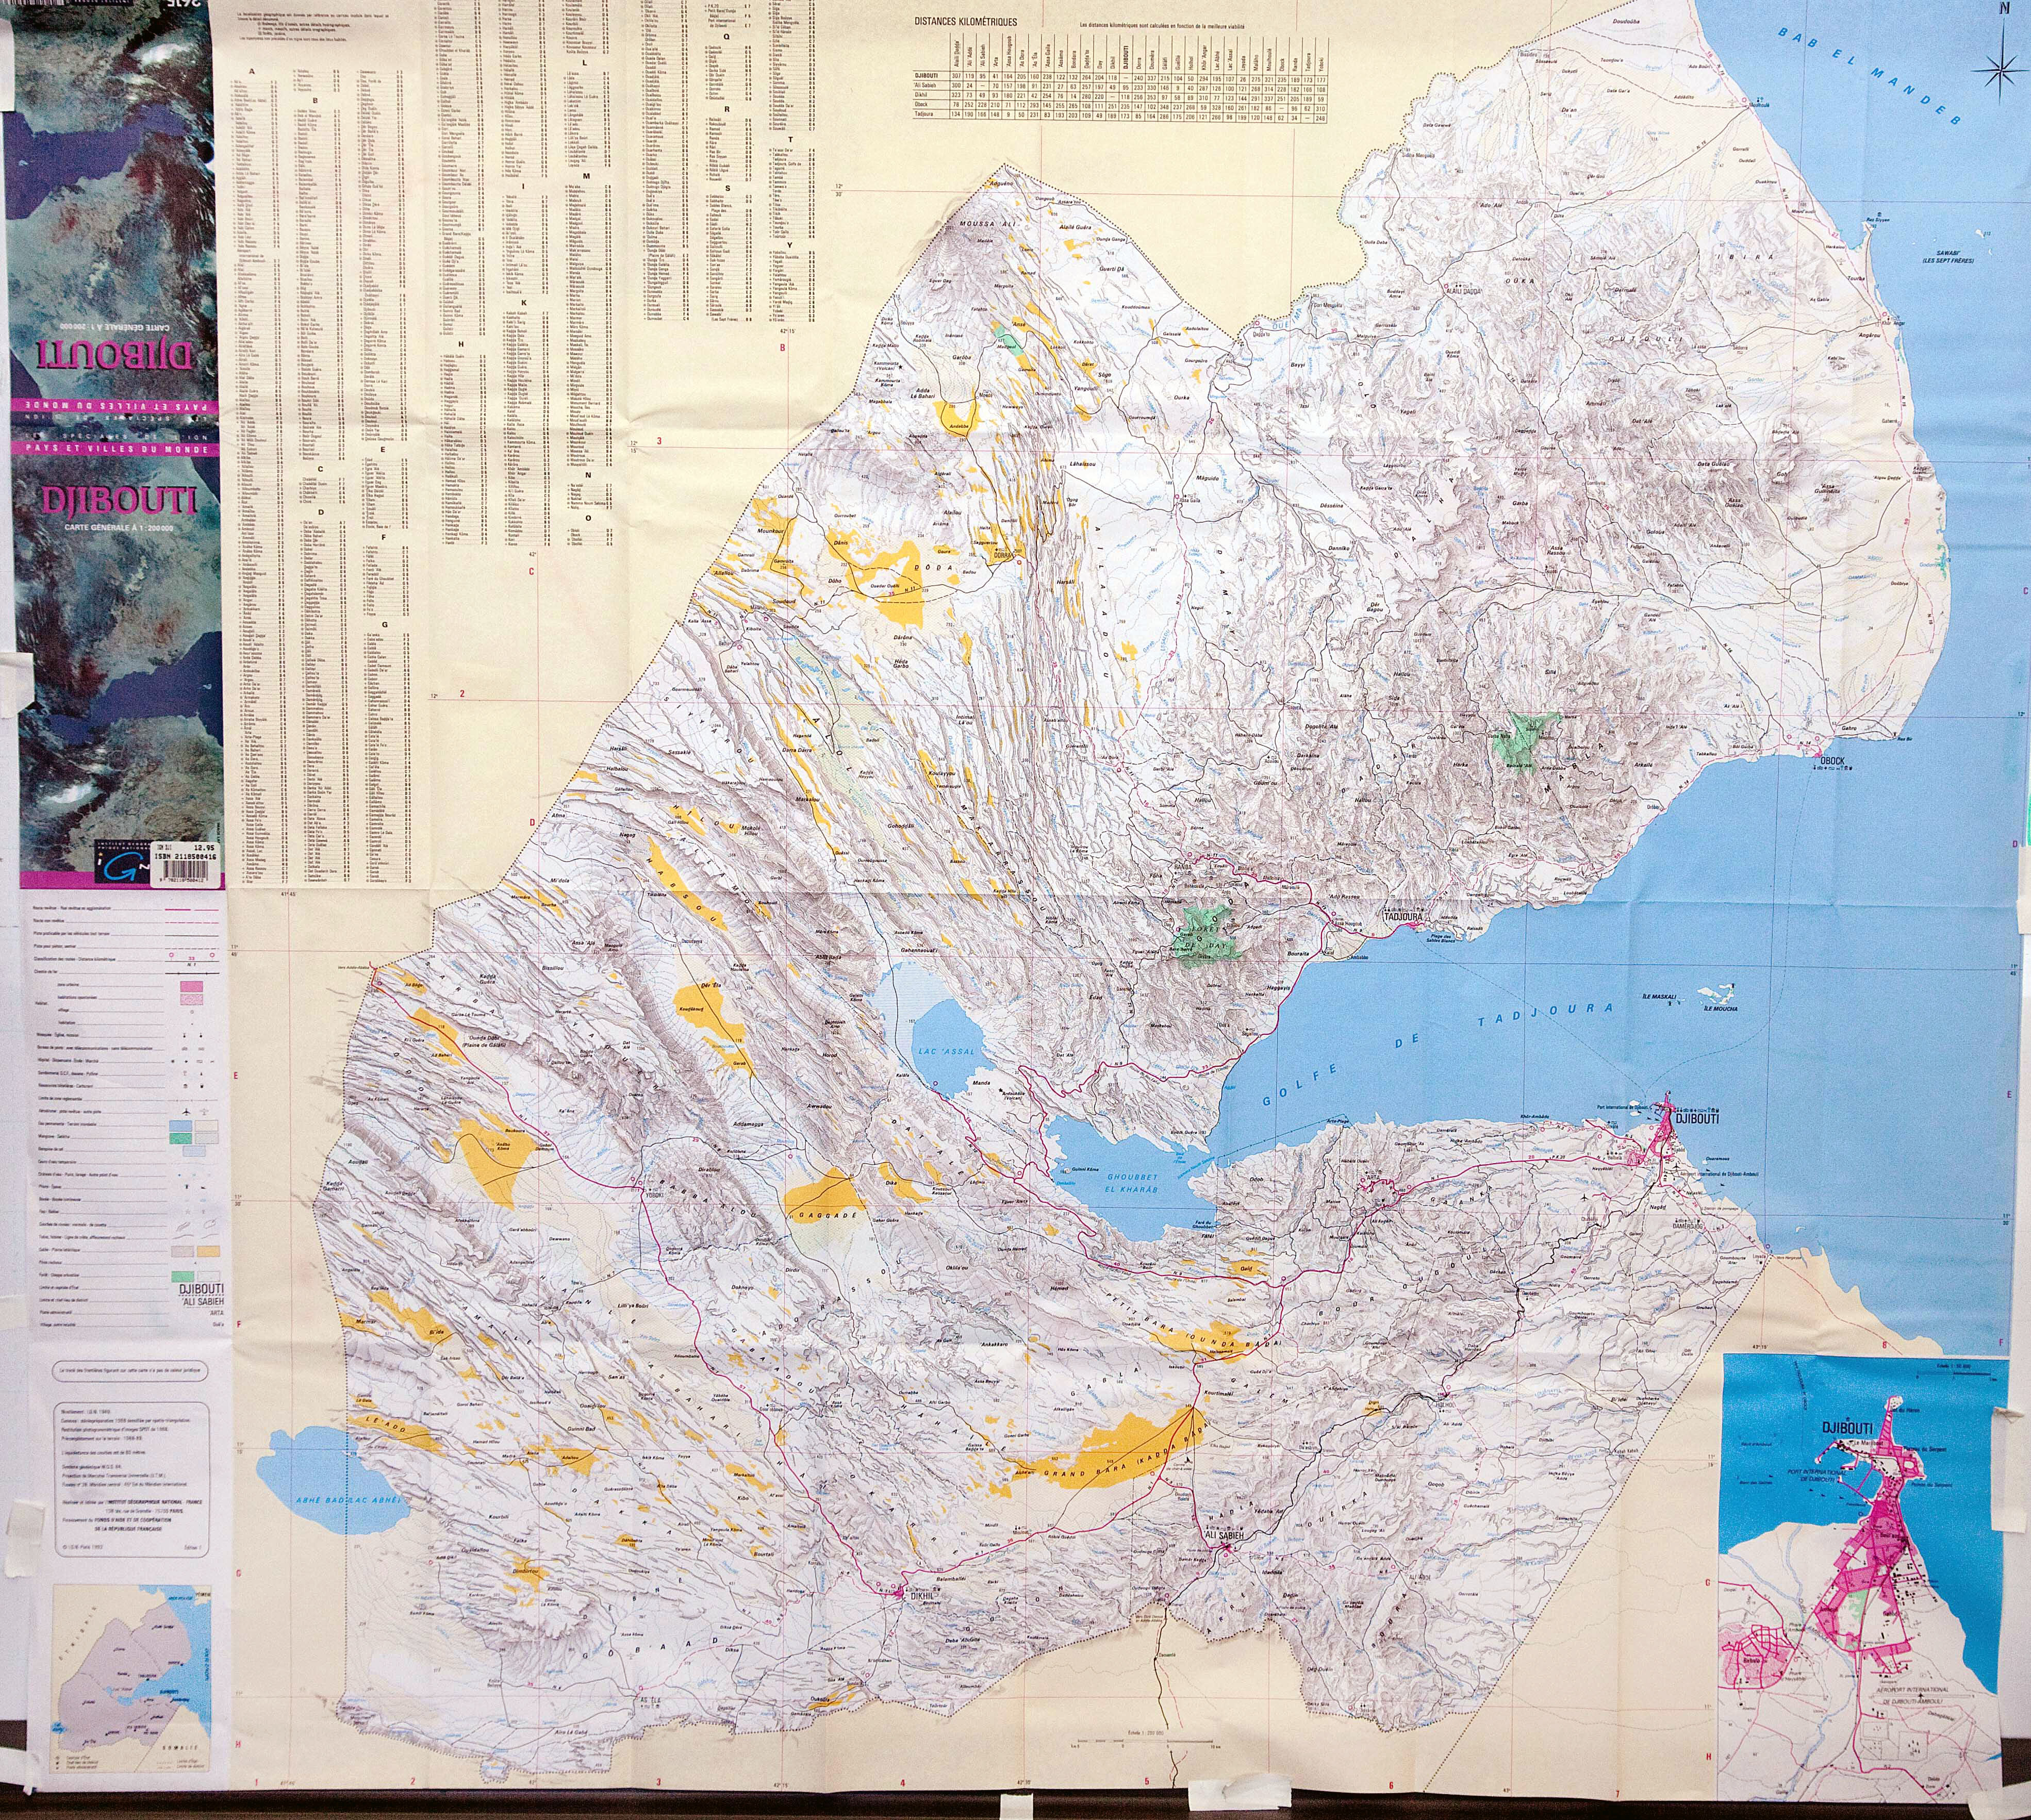 Large Detailed Map Of Djibouti With Relief And Other Marks Djibouti